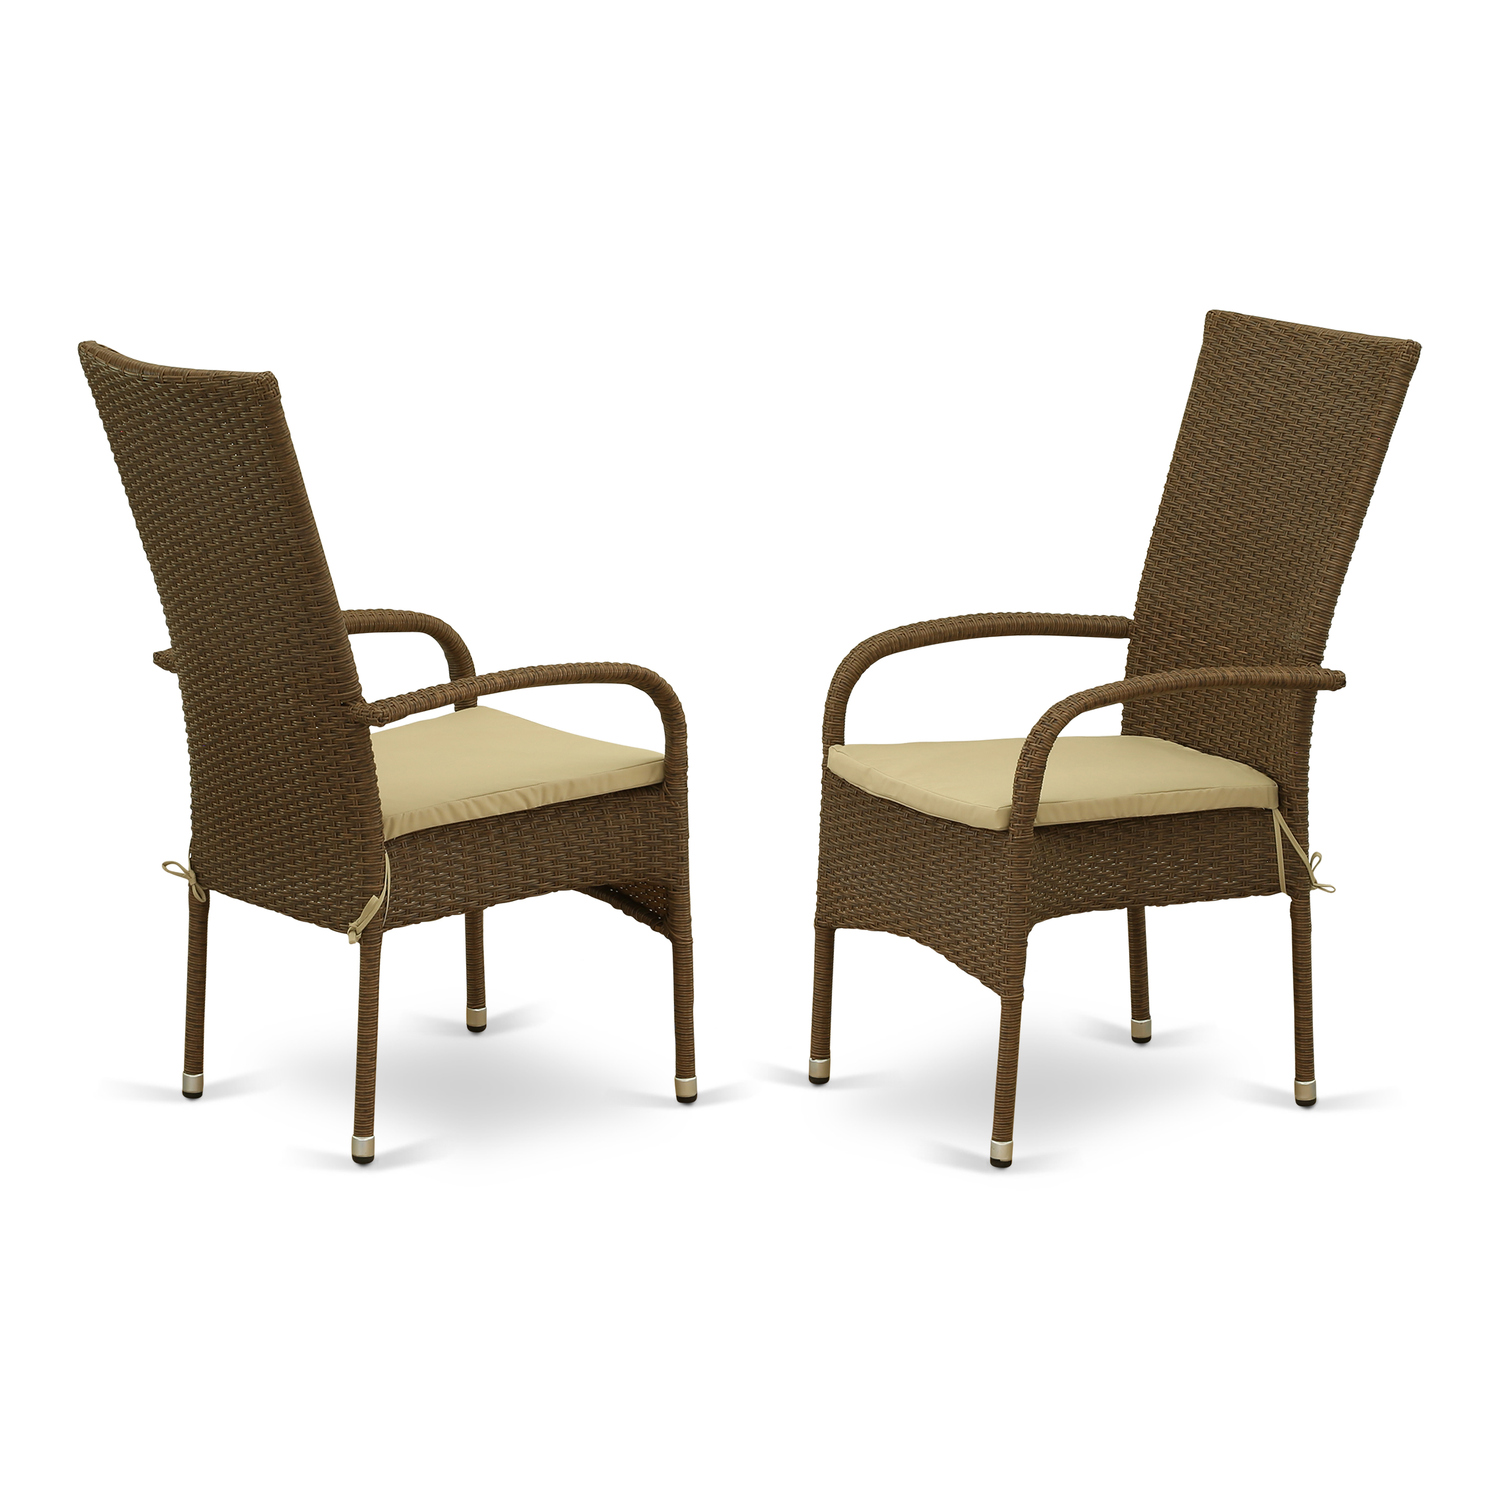 Set of 2 Chairs OSLC102A OSLO PATIO CHAIR WITH CUSHION, BROWN WICKER, AND BEIGE CUSHION - image 2 of 3